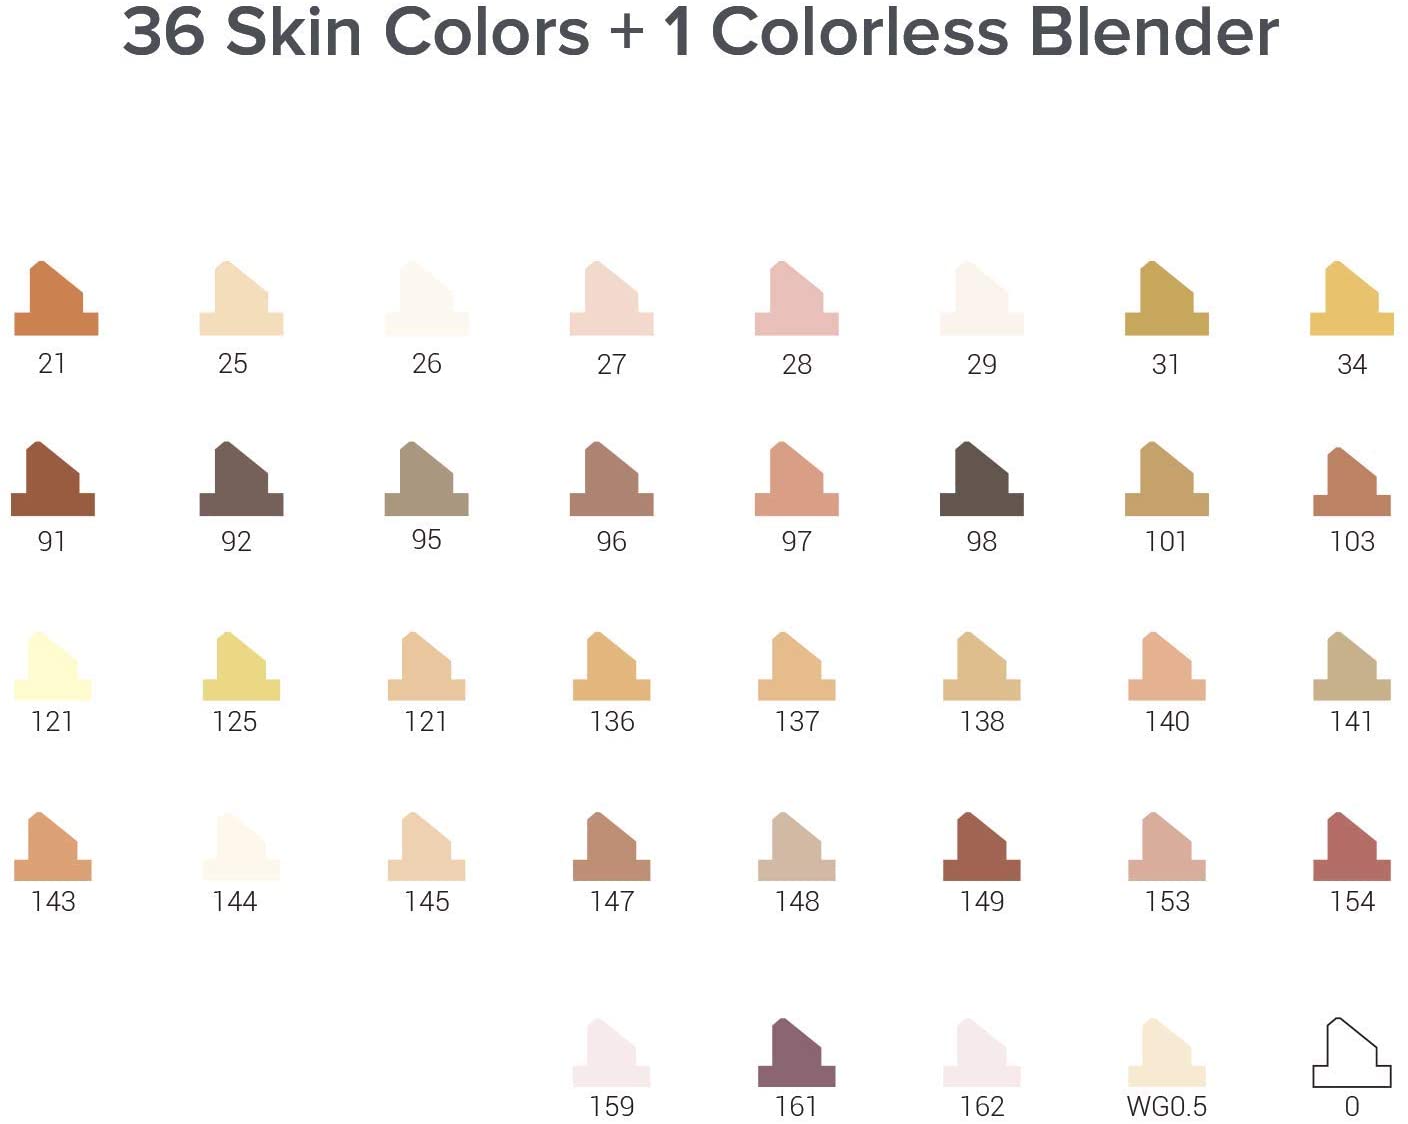 Ohuhu Oahu Series Alcohol Based 36 Skin Tone Colors plus Colorless Ble – JG  Superstore